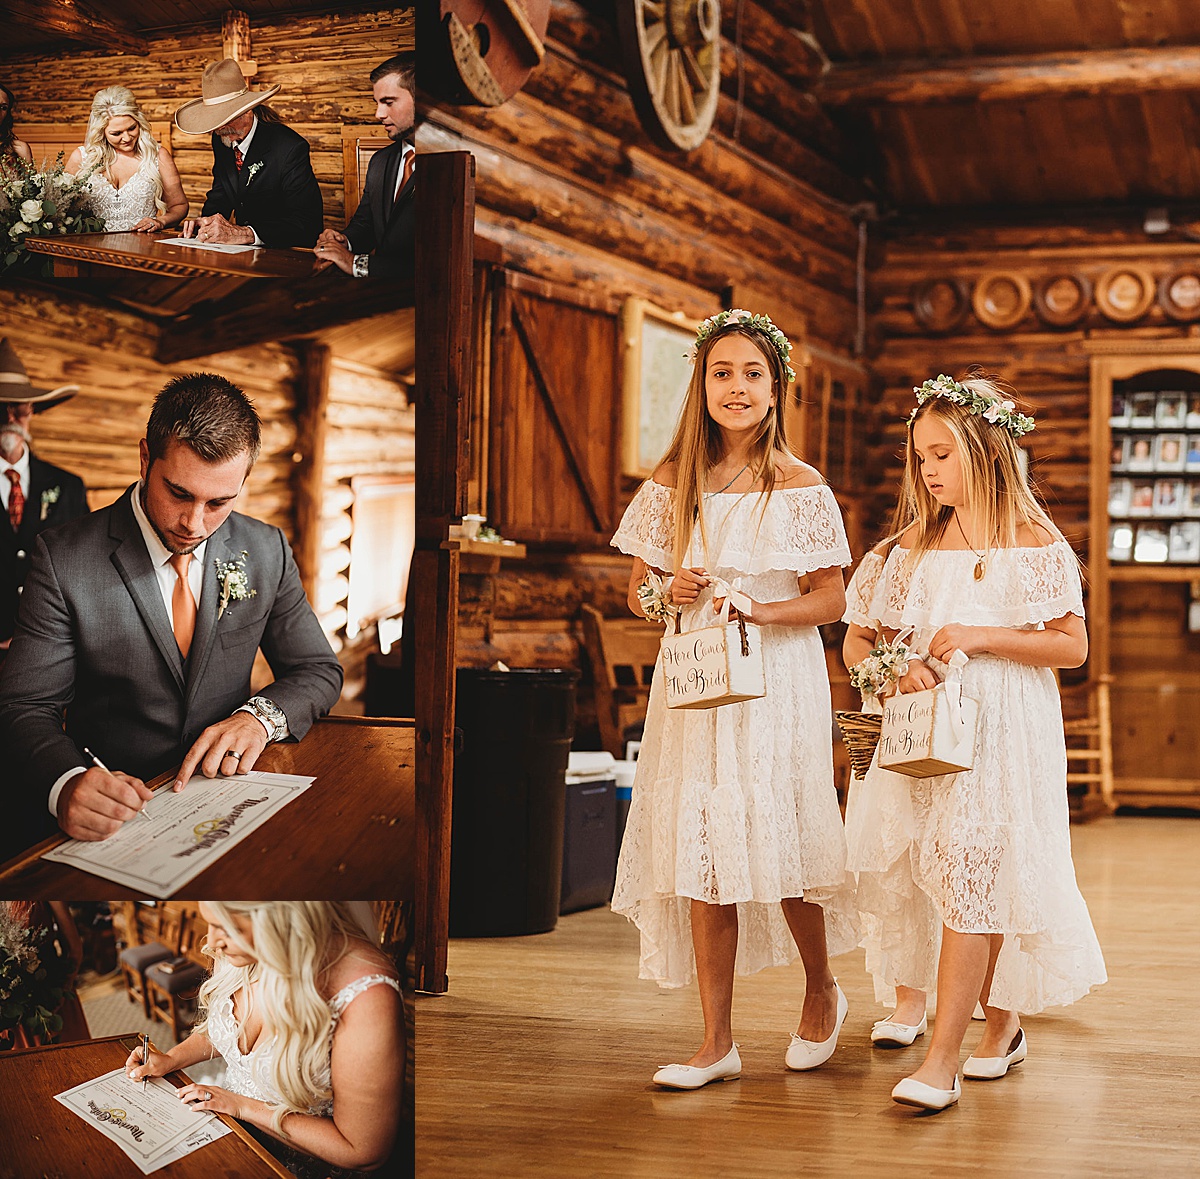 Bride and groom sign marriage certificate with flower girls in lace dresses and flower crowns look on | Three Feather Photo Co